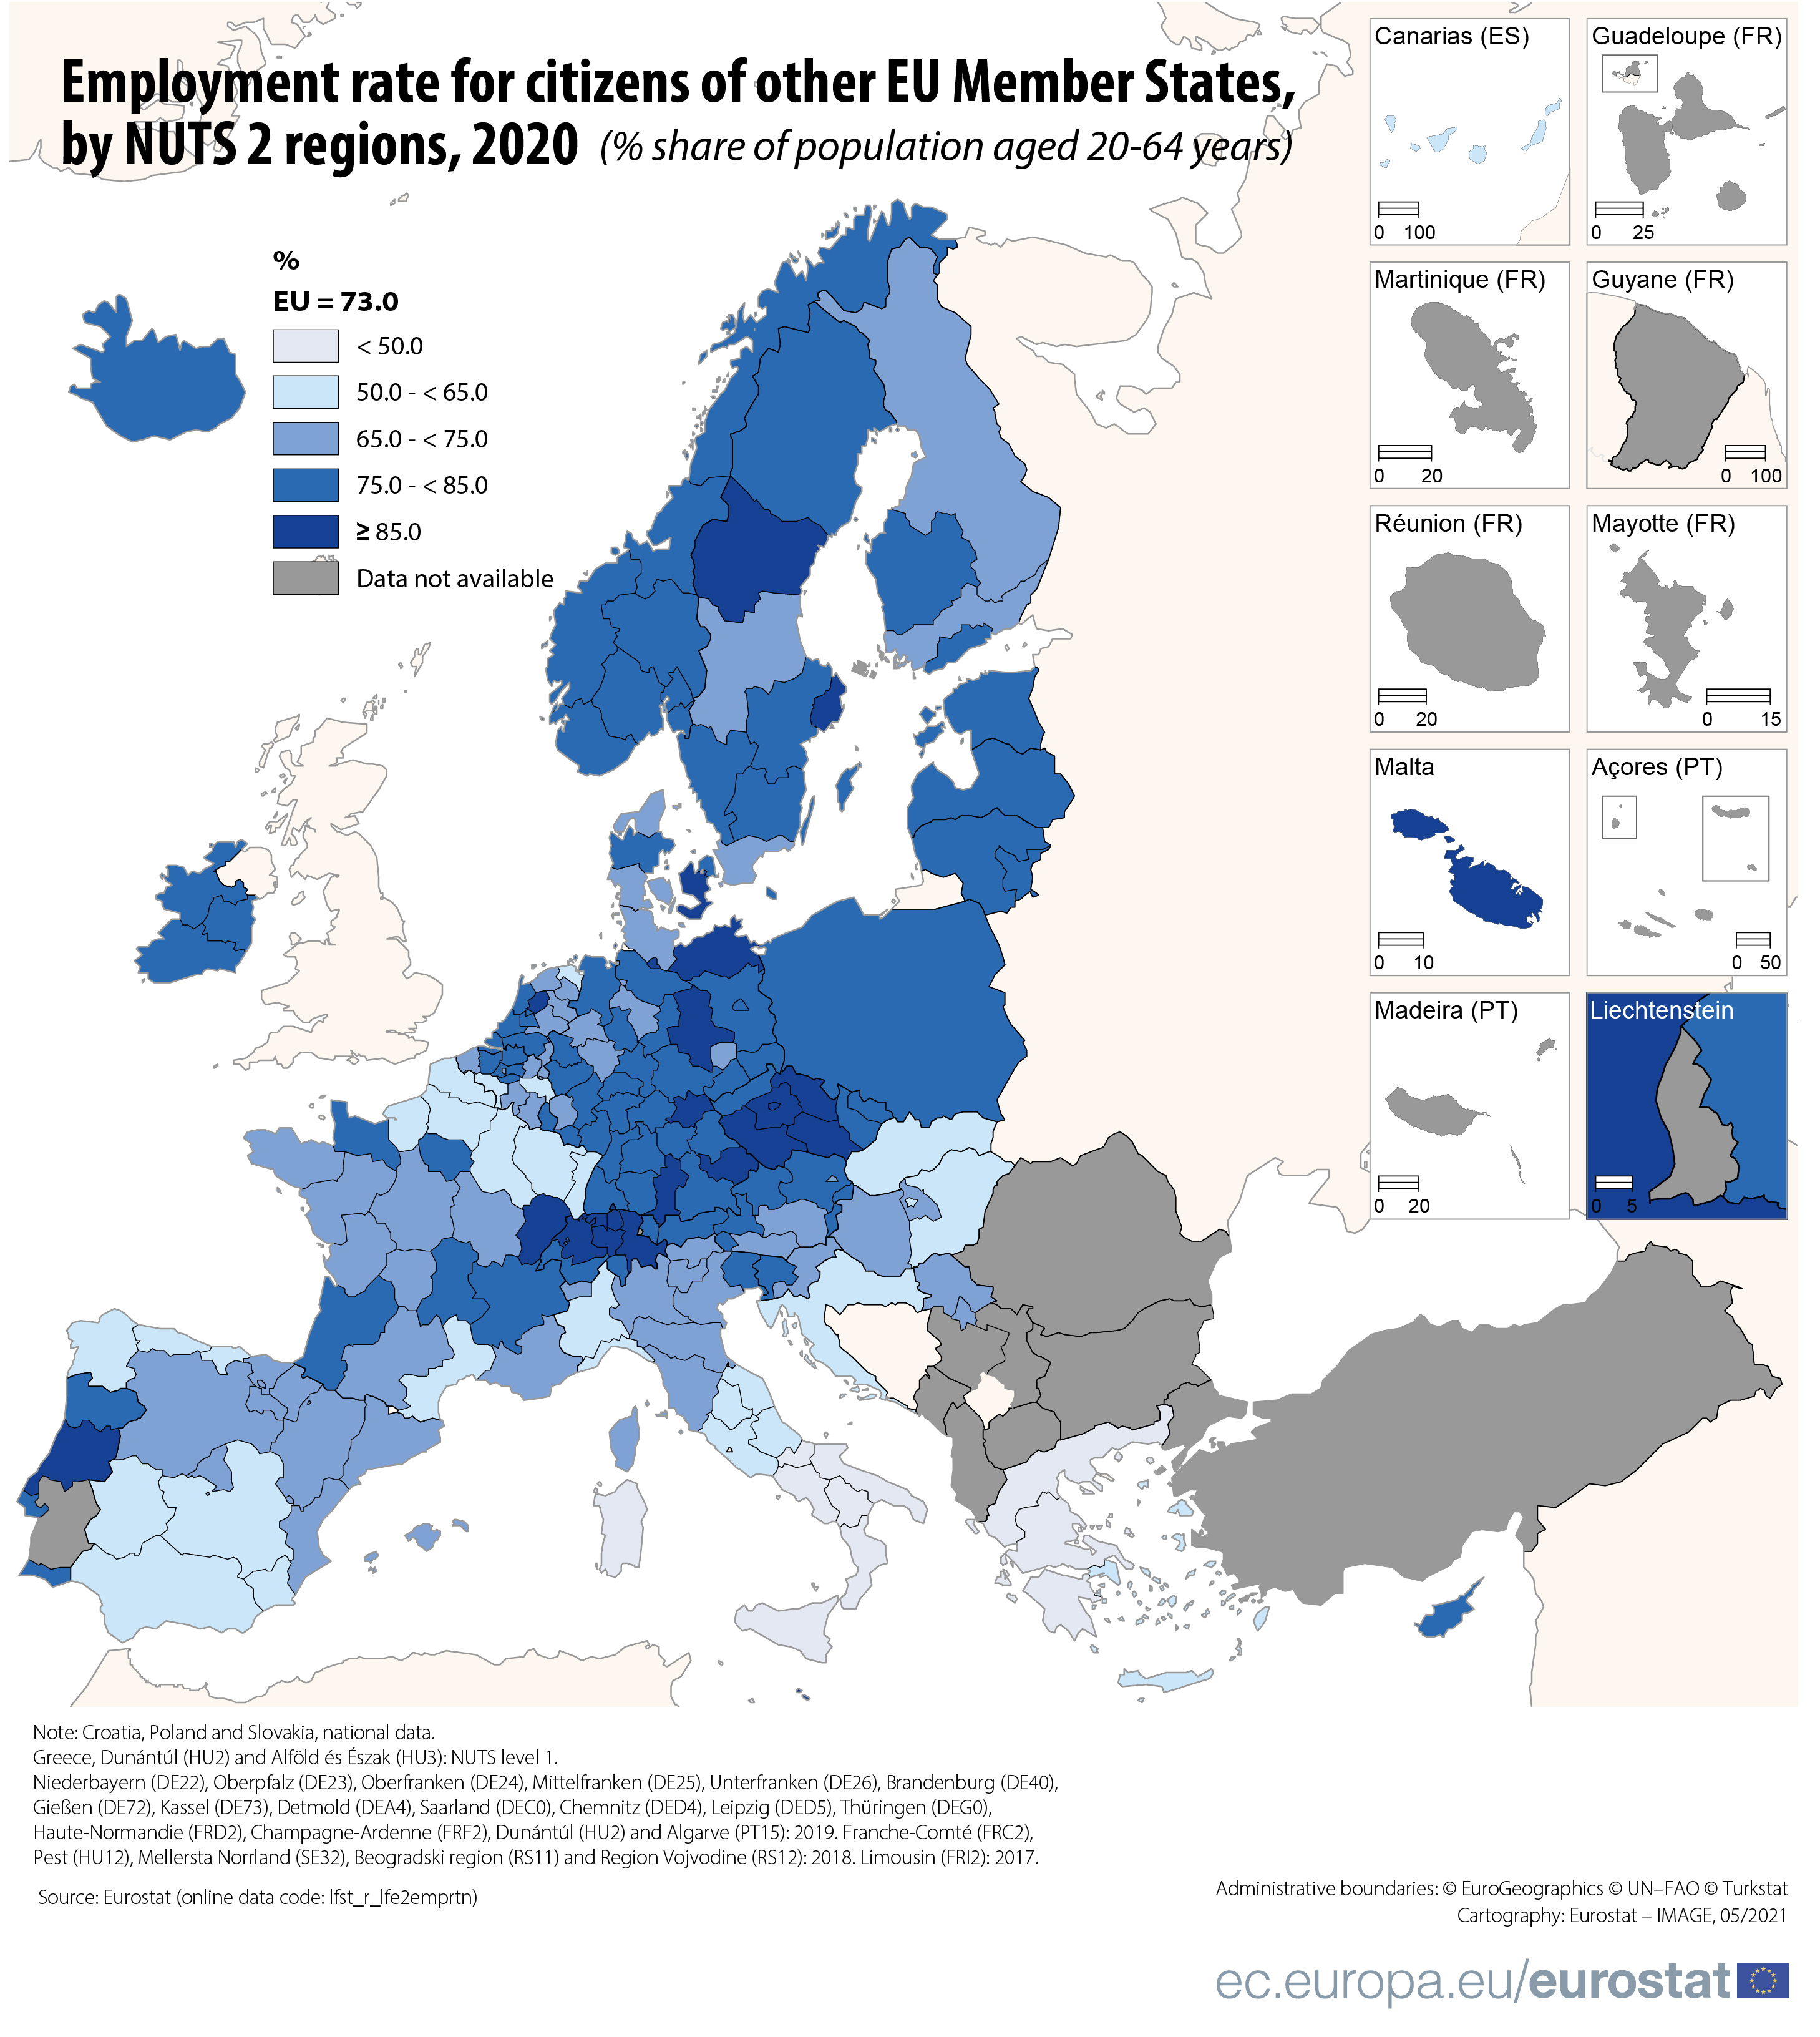 Employment rate of citizens of other EU countries, NUTS 2 regions, 2020 data